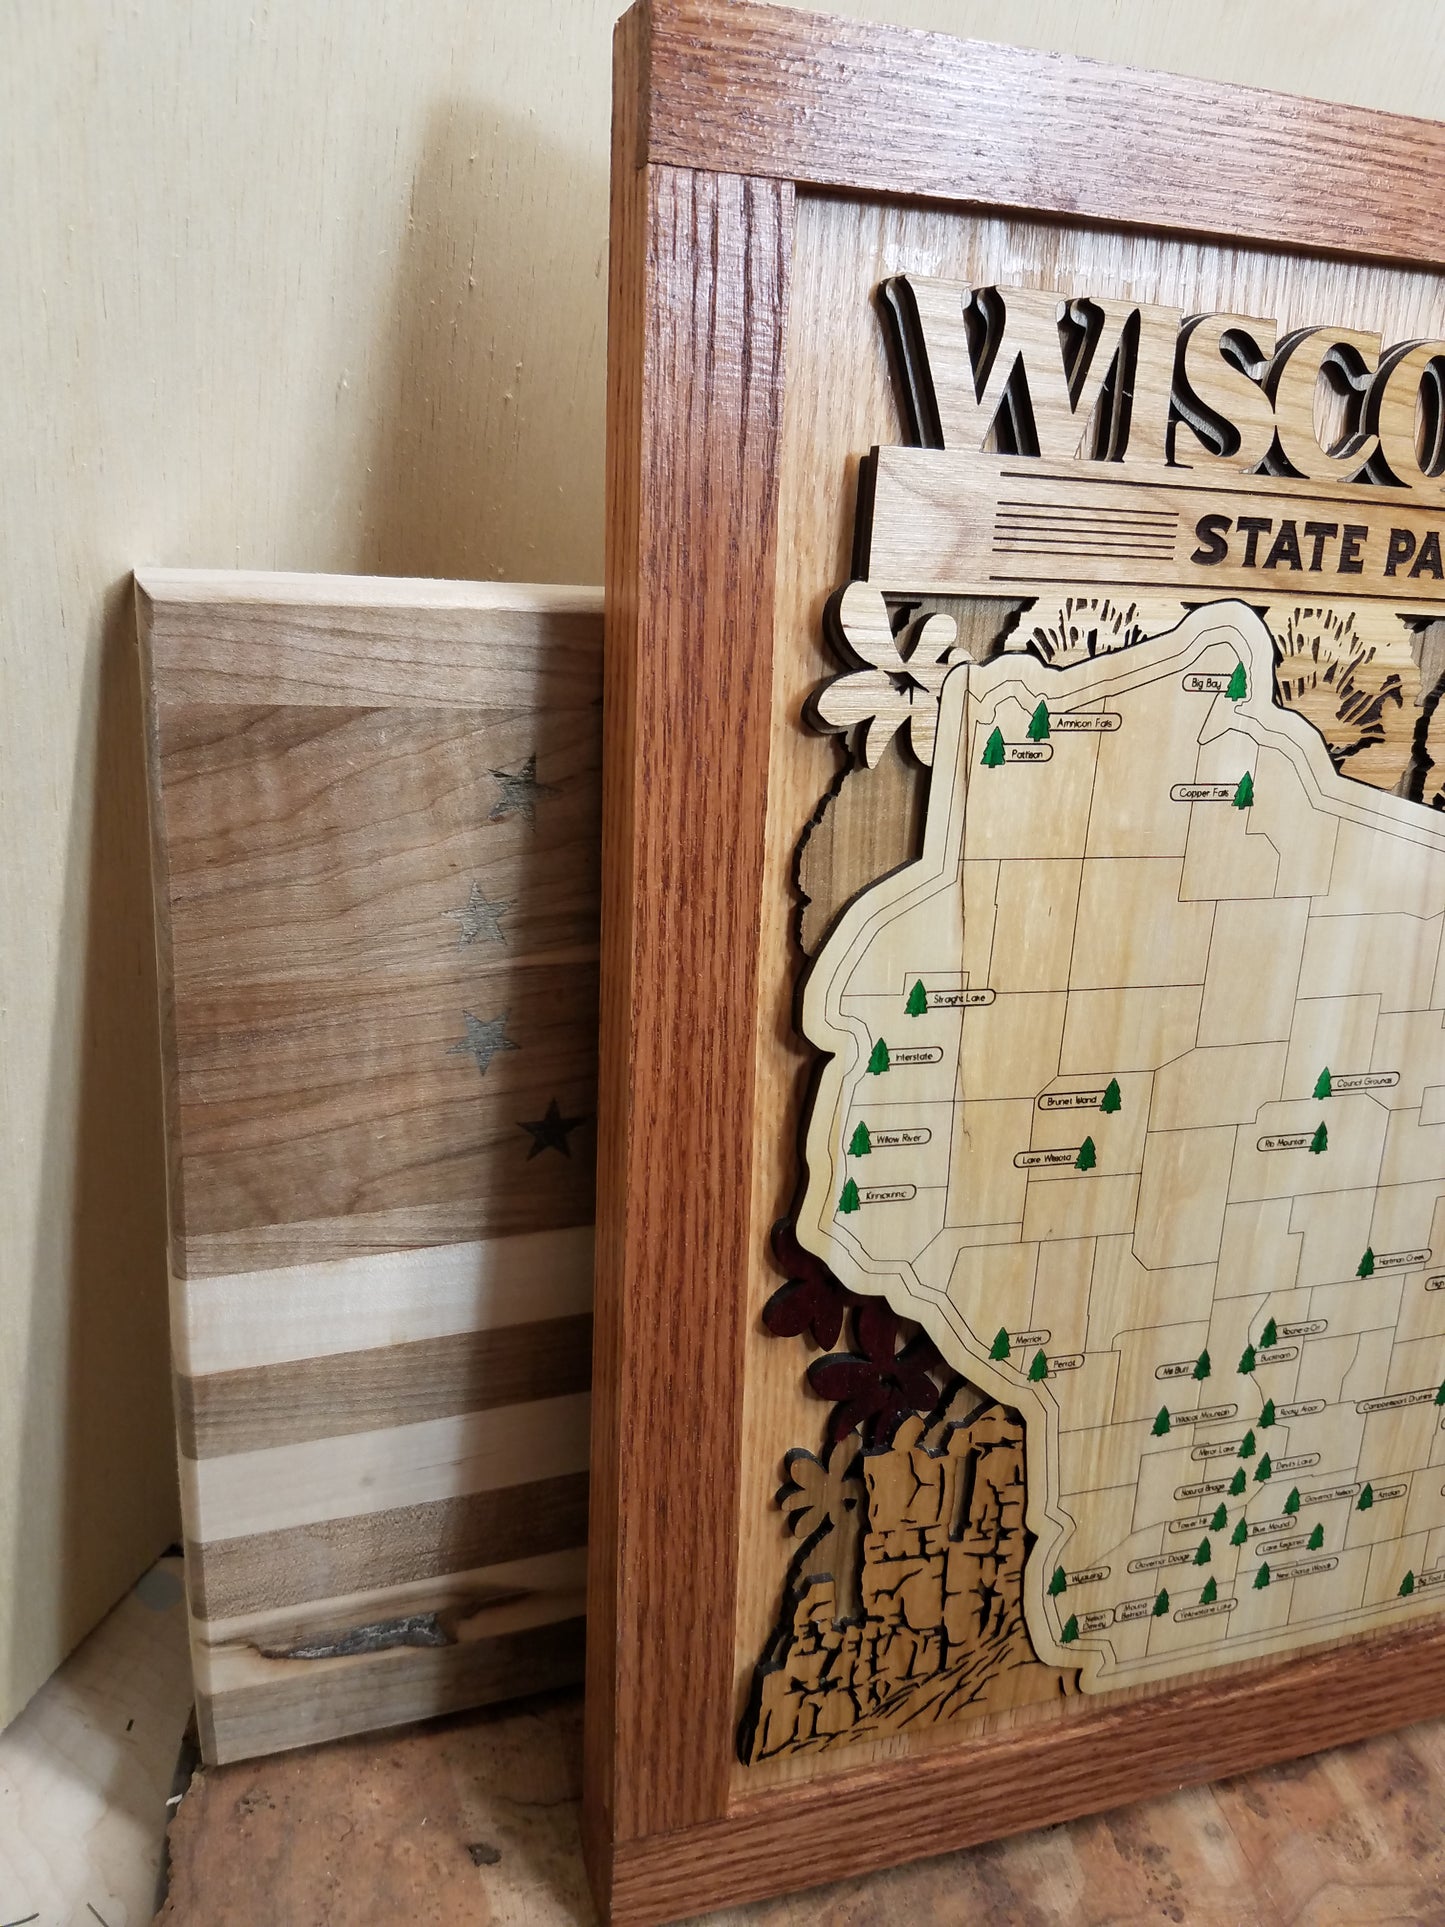 Wisconsin State Park Map